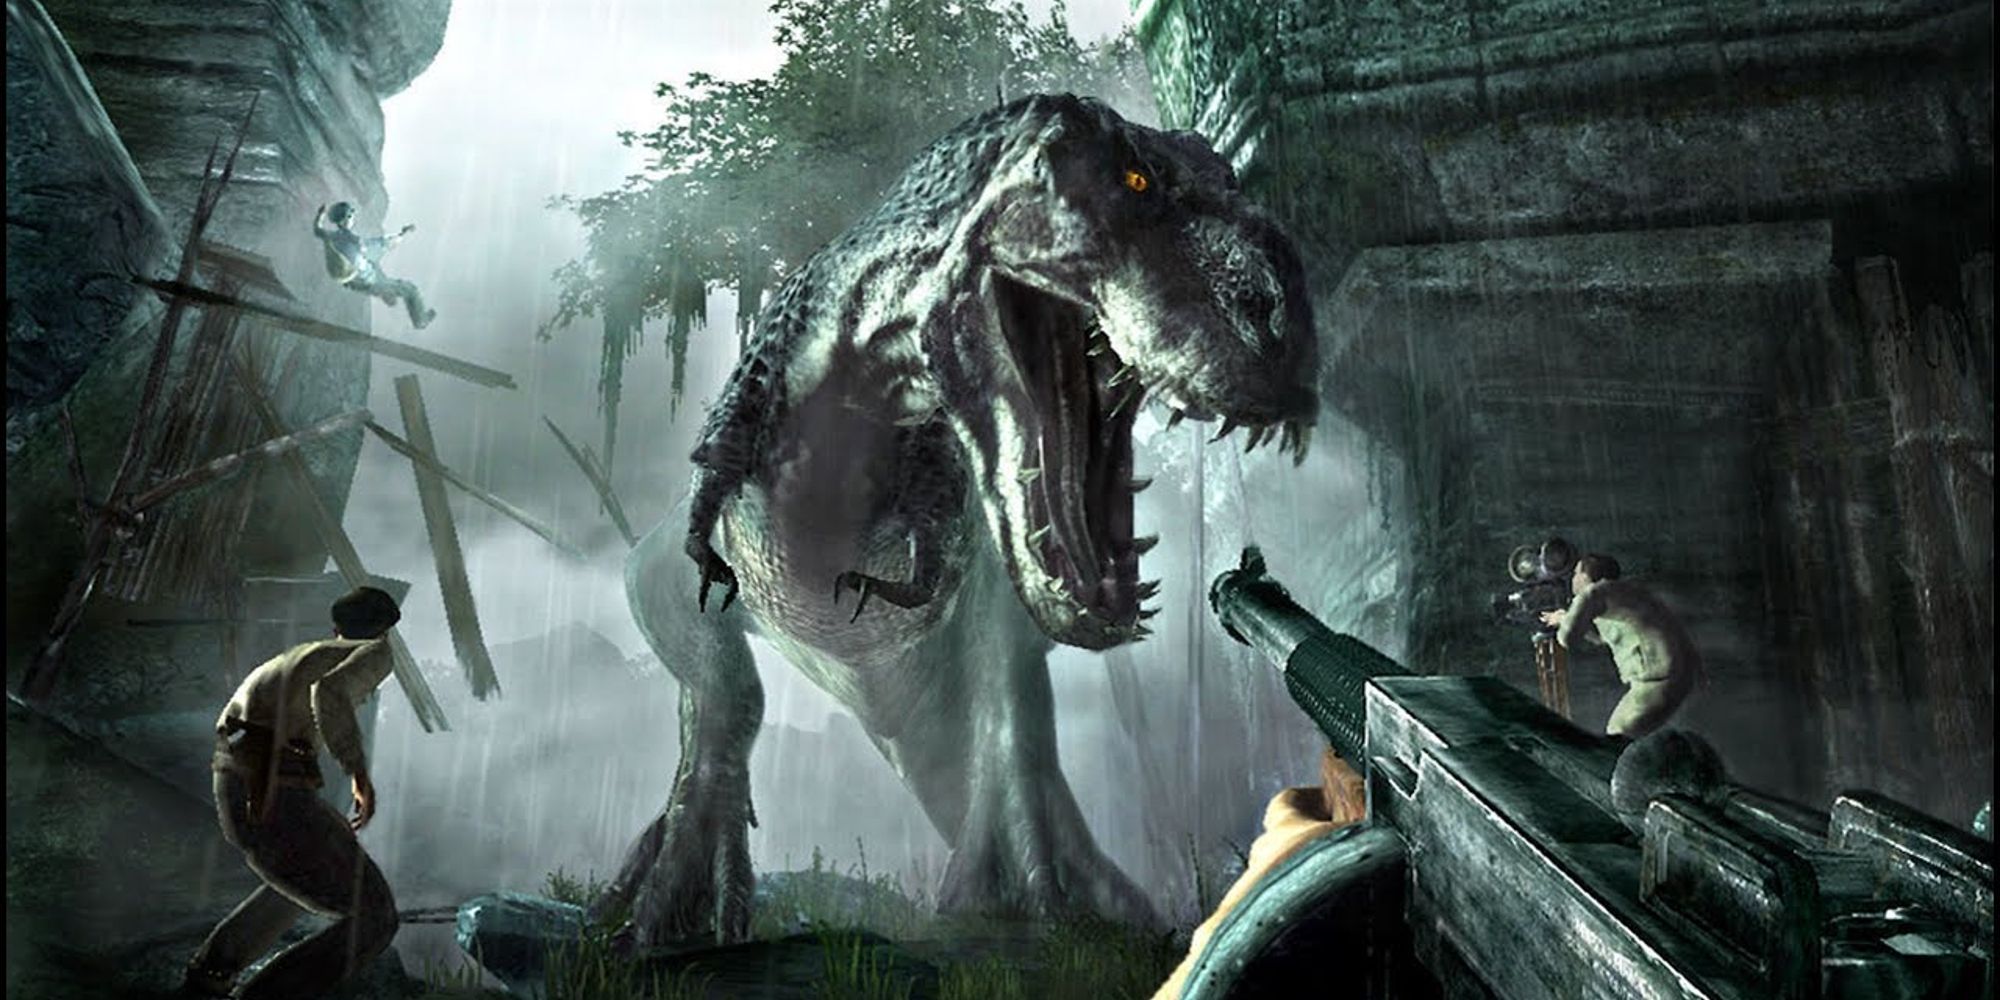 First appearance of the V Rex breaking through a bridge in Peter Jacksons King Kong video game